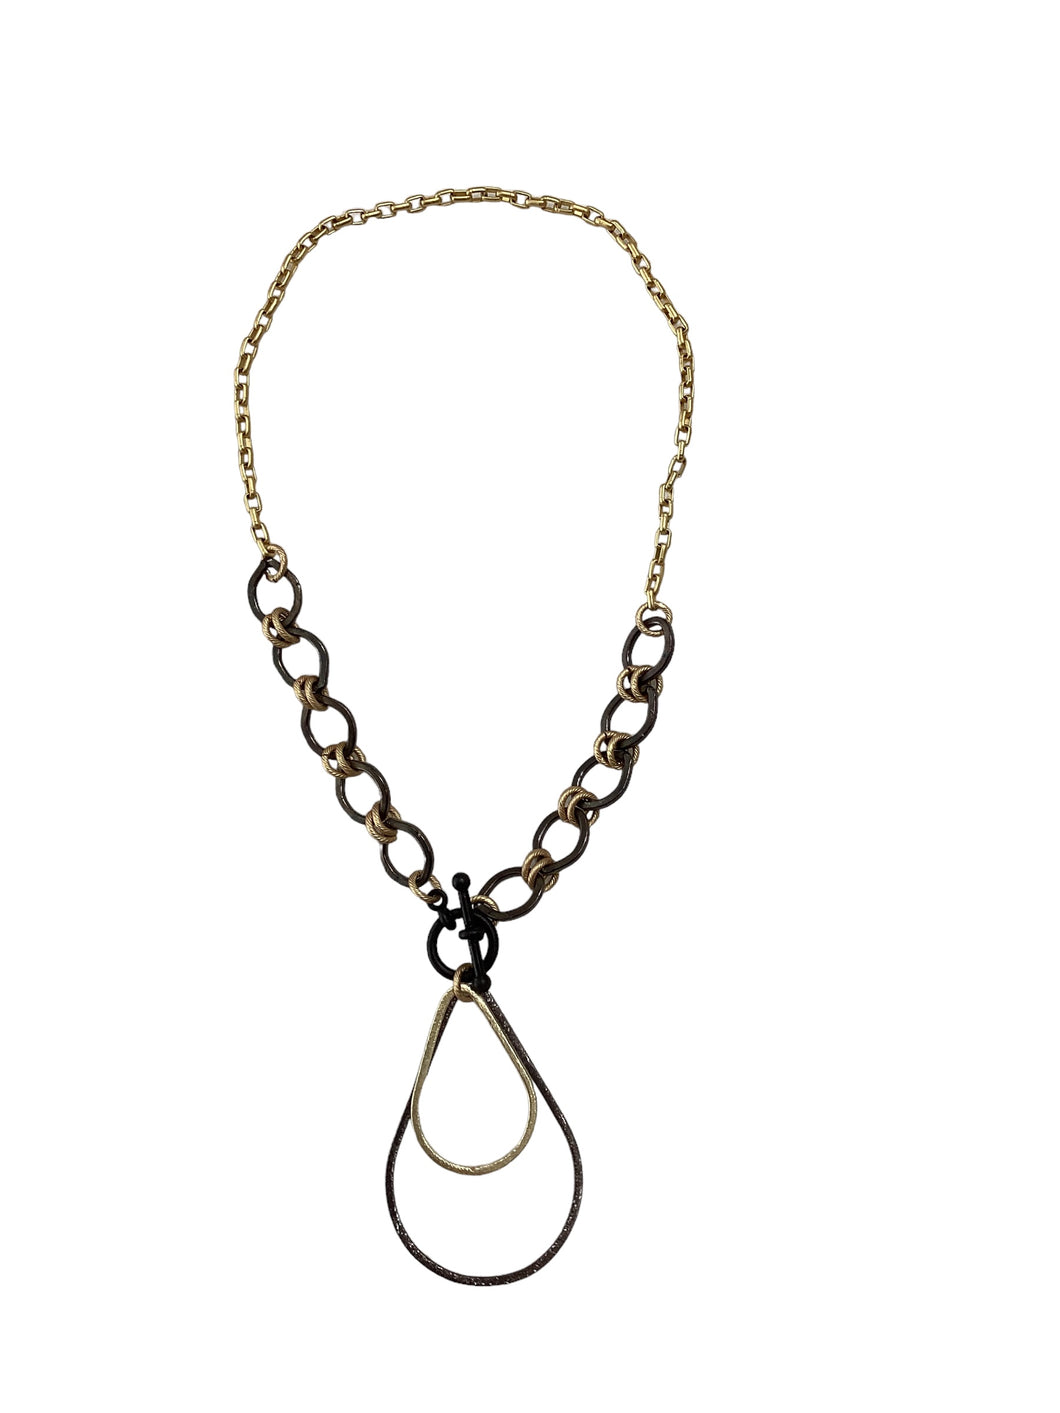 Black and Gold Chain with Toggle Clasp and Tear Drops Necklace